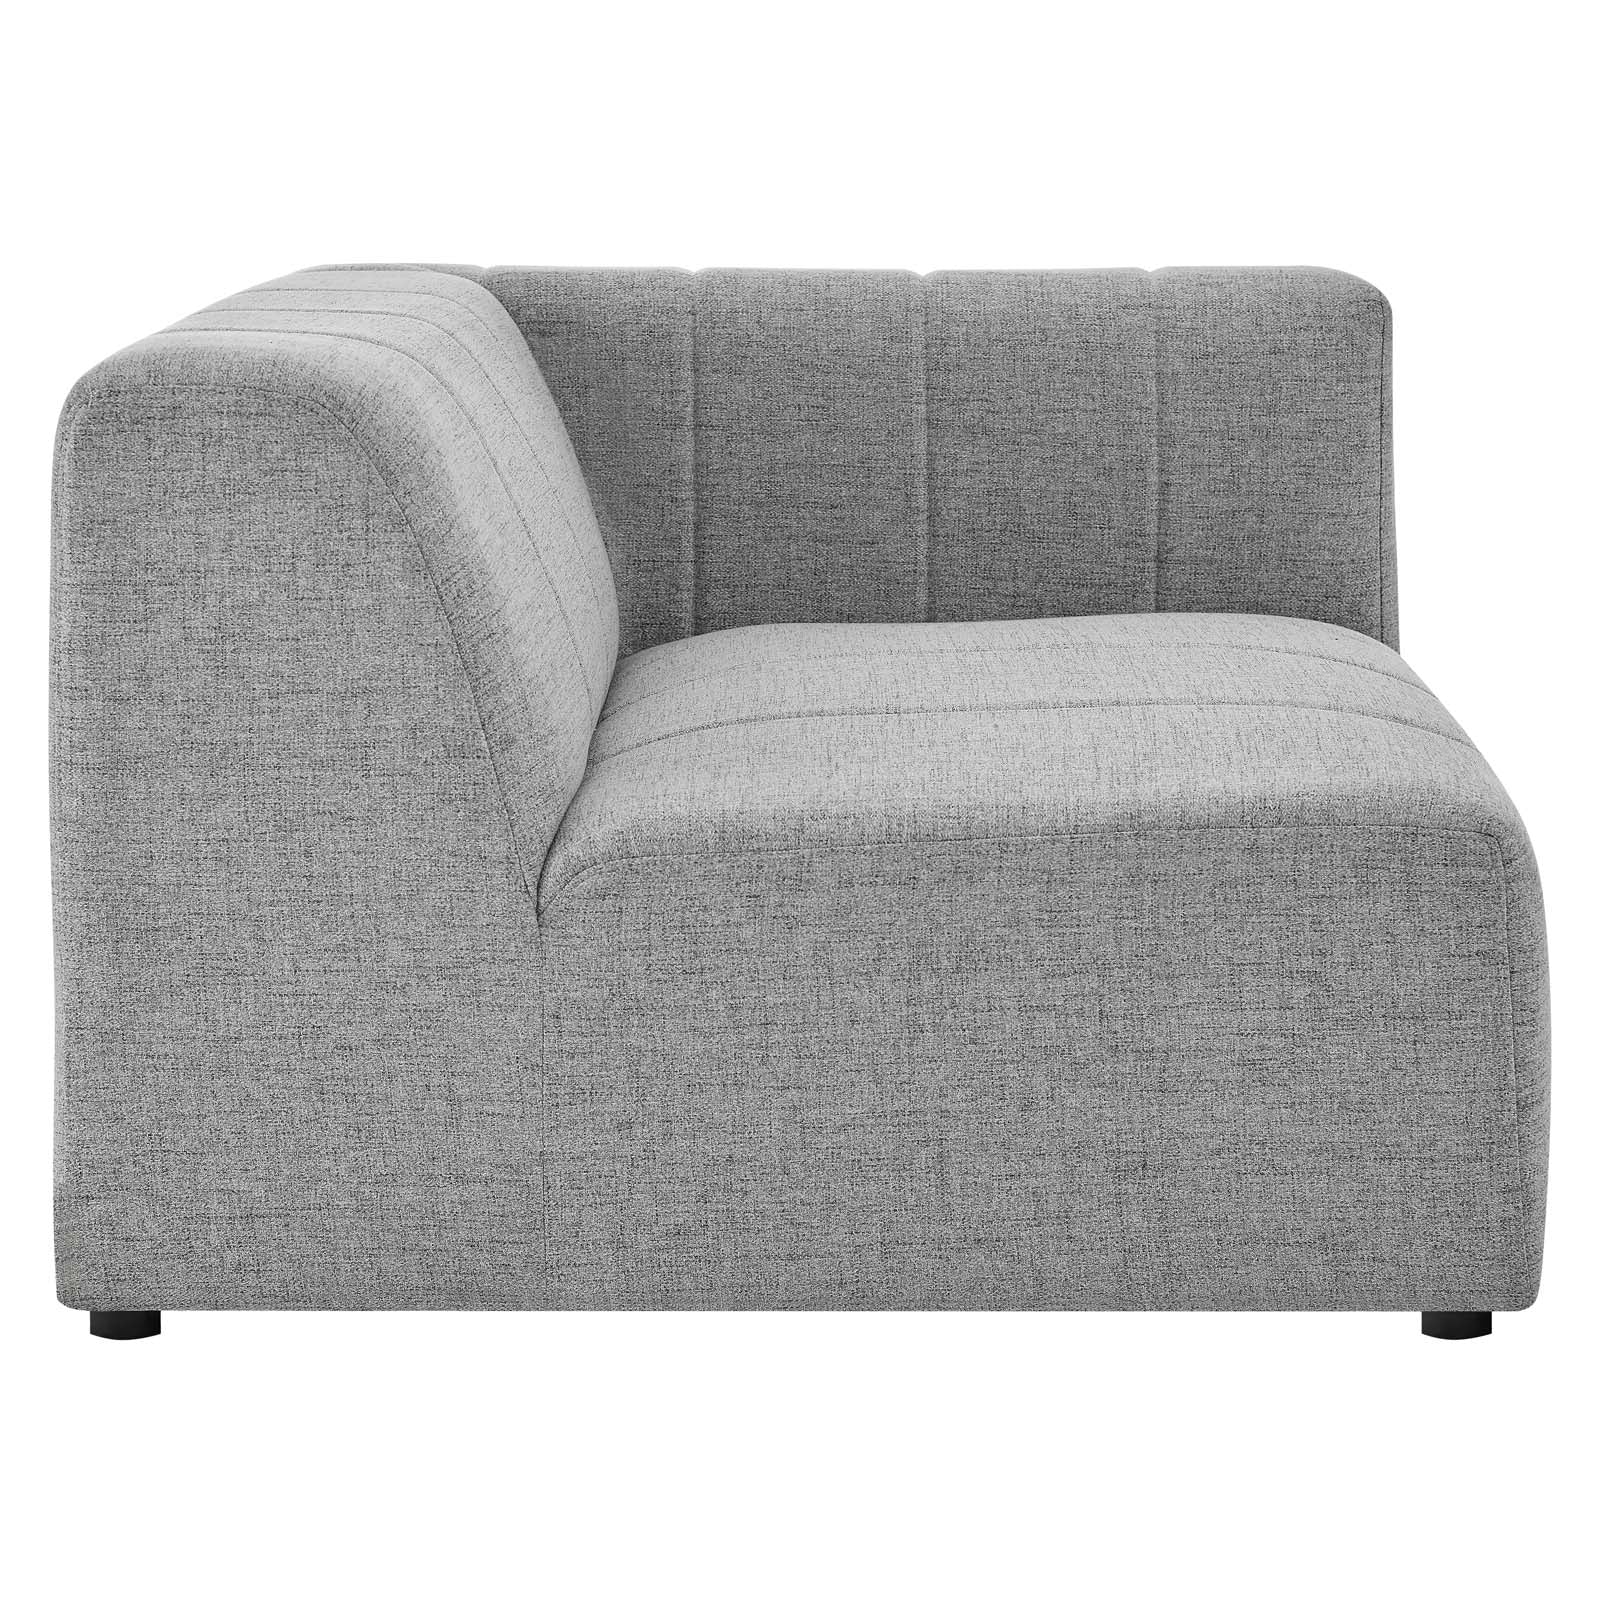 Modway Sectional Sofas - Bartlett Upholstered Fabric 27.5 " H 5-Piece Sectional Sofa Light Gray